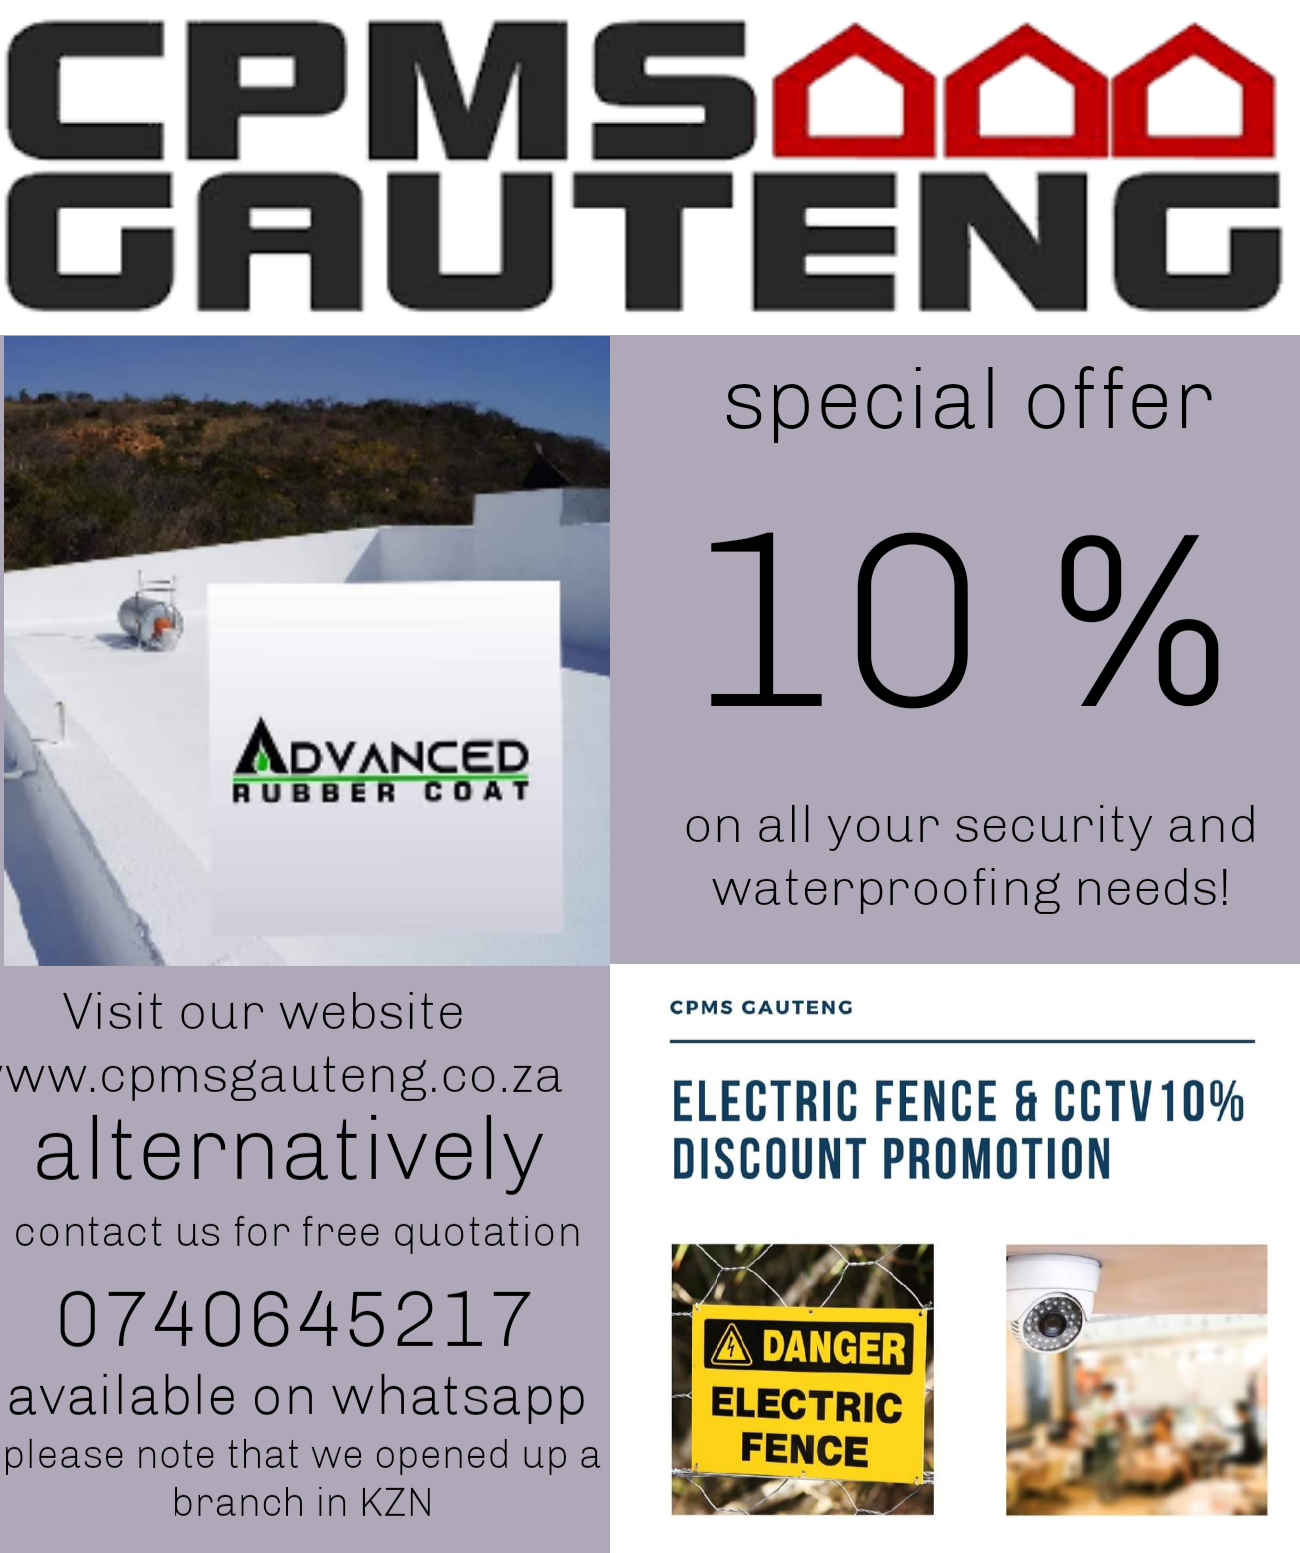 We have been in the business since 2010. We are a client service focused company that does Waterproofing, Damp-proofing,  Painting of Properties, Electric Fencing, CCTV, Alarms, Gate Automation and  Access control. We running a 10% discount at the moment, feel free to give us a shout on 0740645217 http://www.cpmsgauteng.co.za http://advancedrubbercoat.co.za Take note that we opened a new branch in KZN